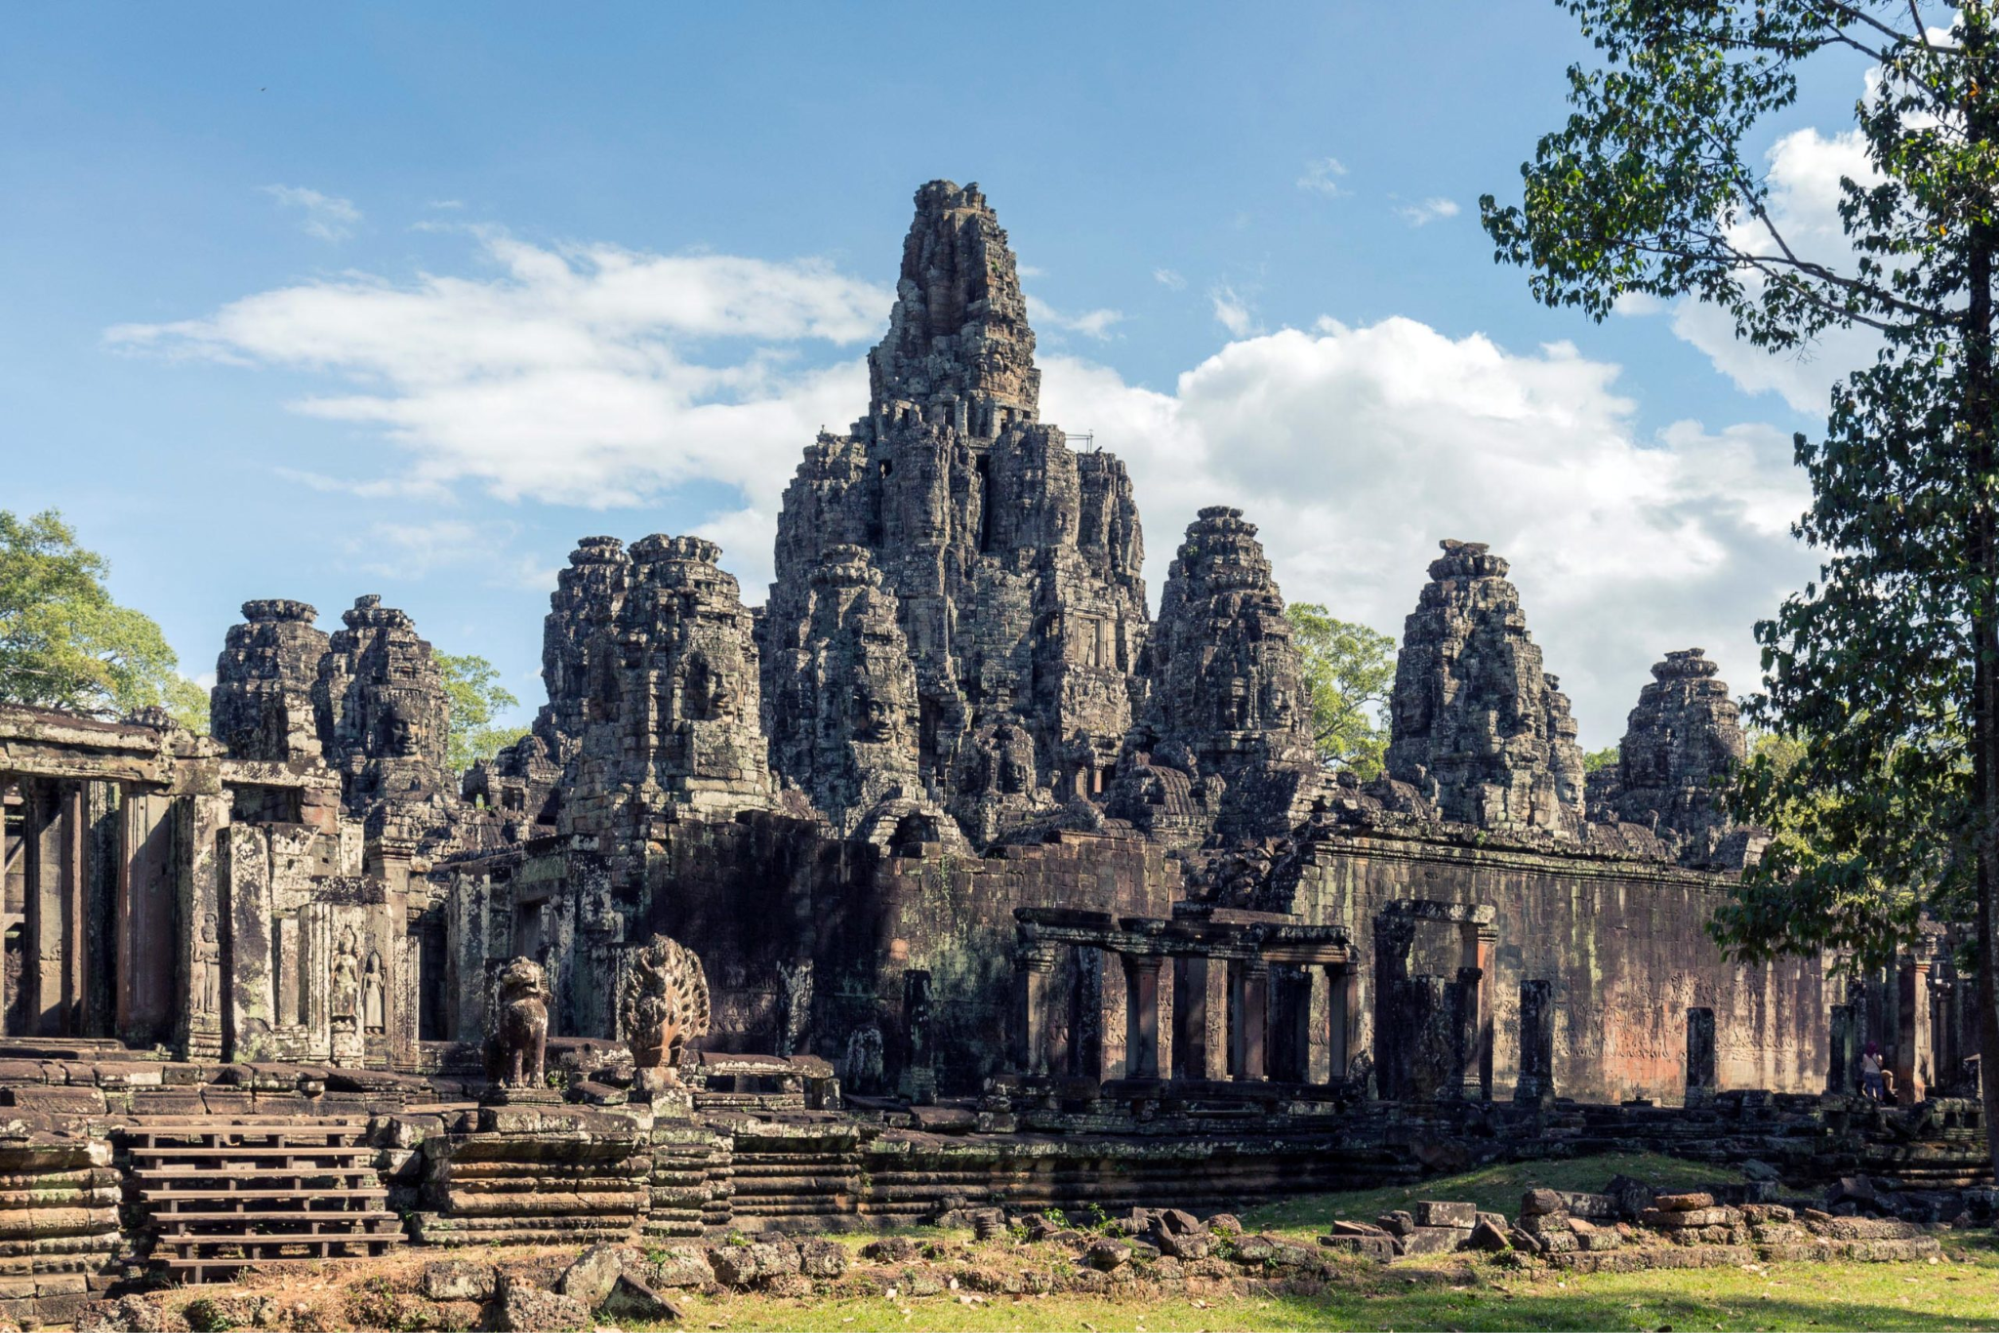 The Bayon Temple is known for its massive stone faces that adorn the temple towers